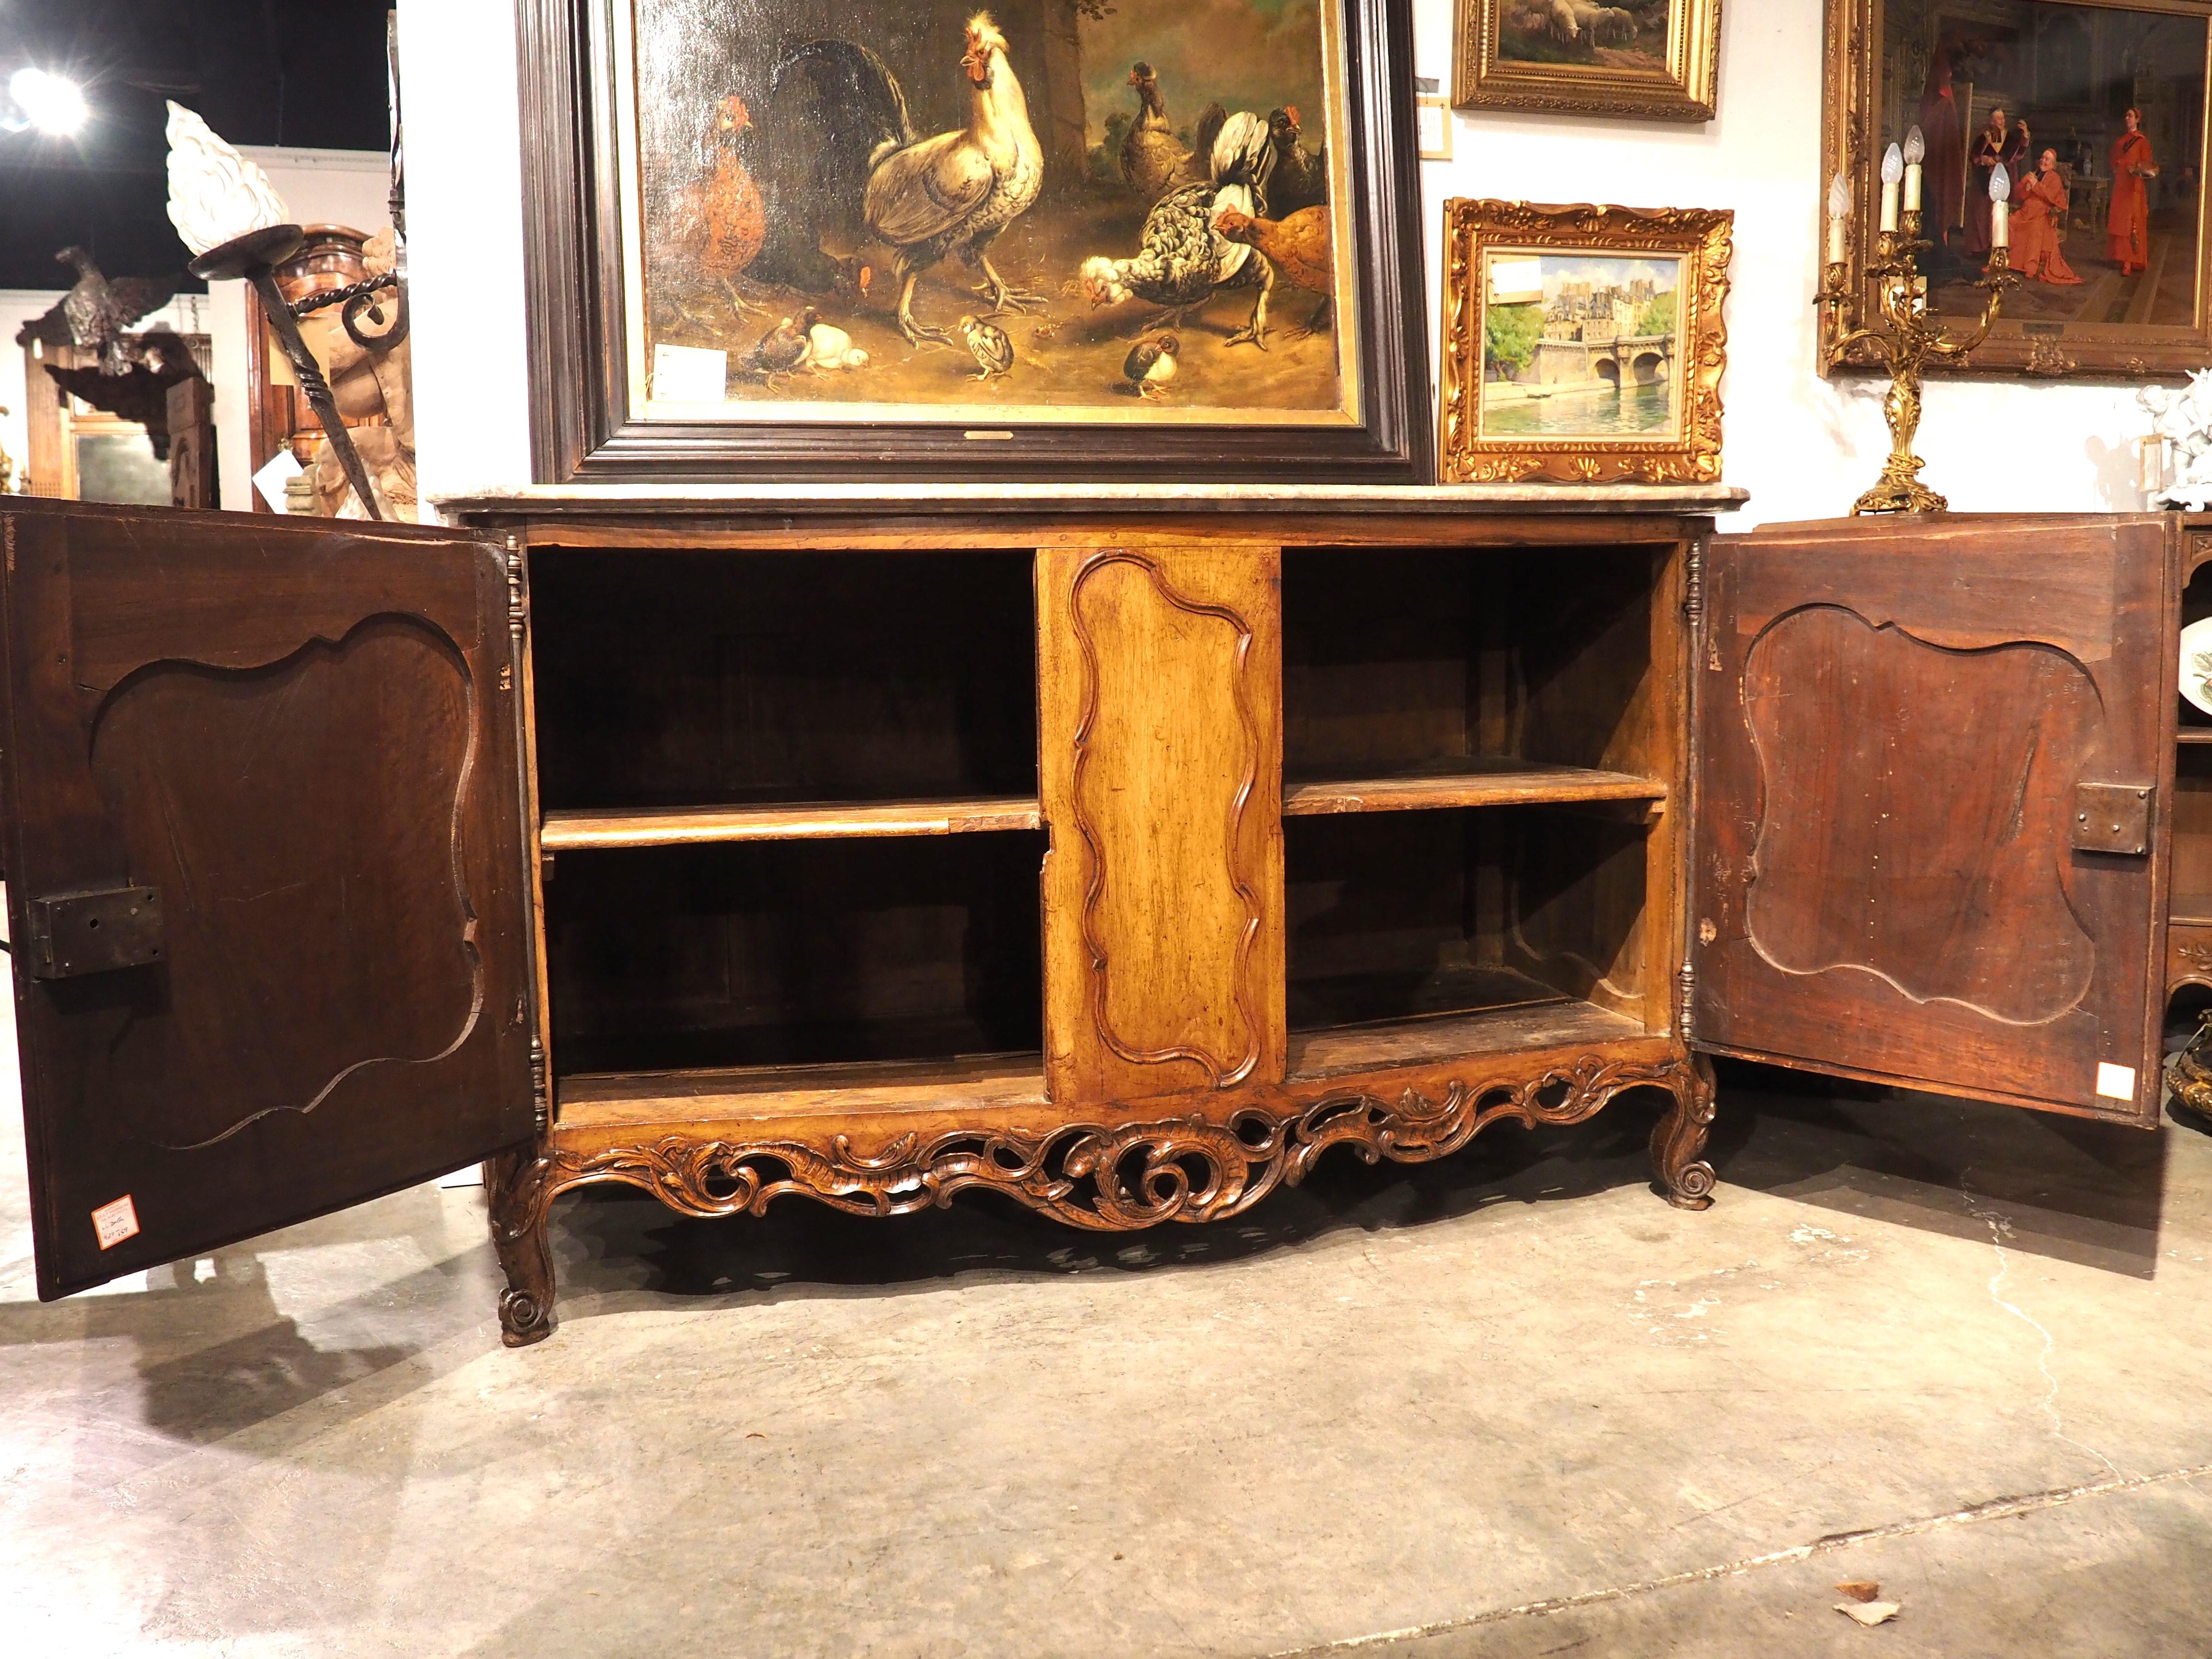 Dating to the period of Louis XV (circa 1750), this large and elegant walnut buffet de chateau was hand-carved in the Southern French town of Nimes. Woodworkers in Nimes adhered to the style dictated by the period, but these talented ebenistes added